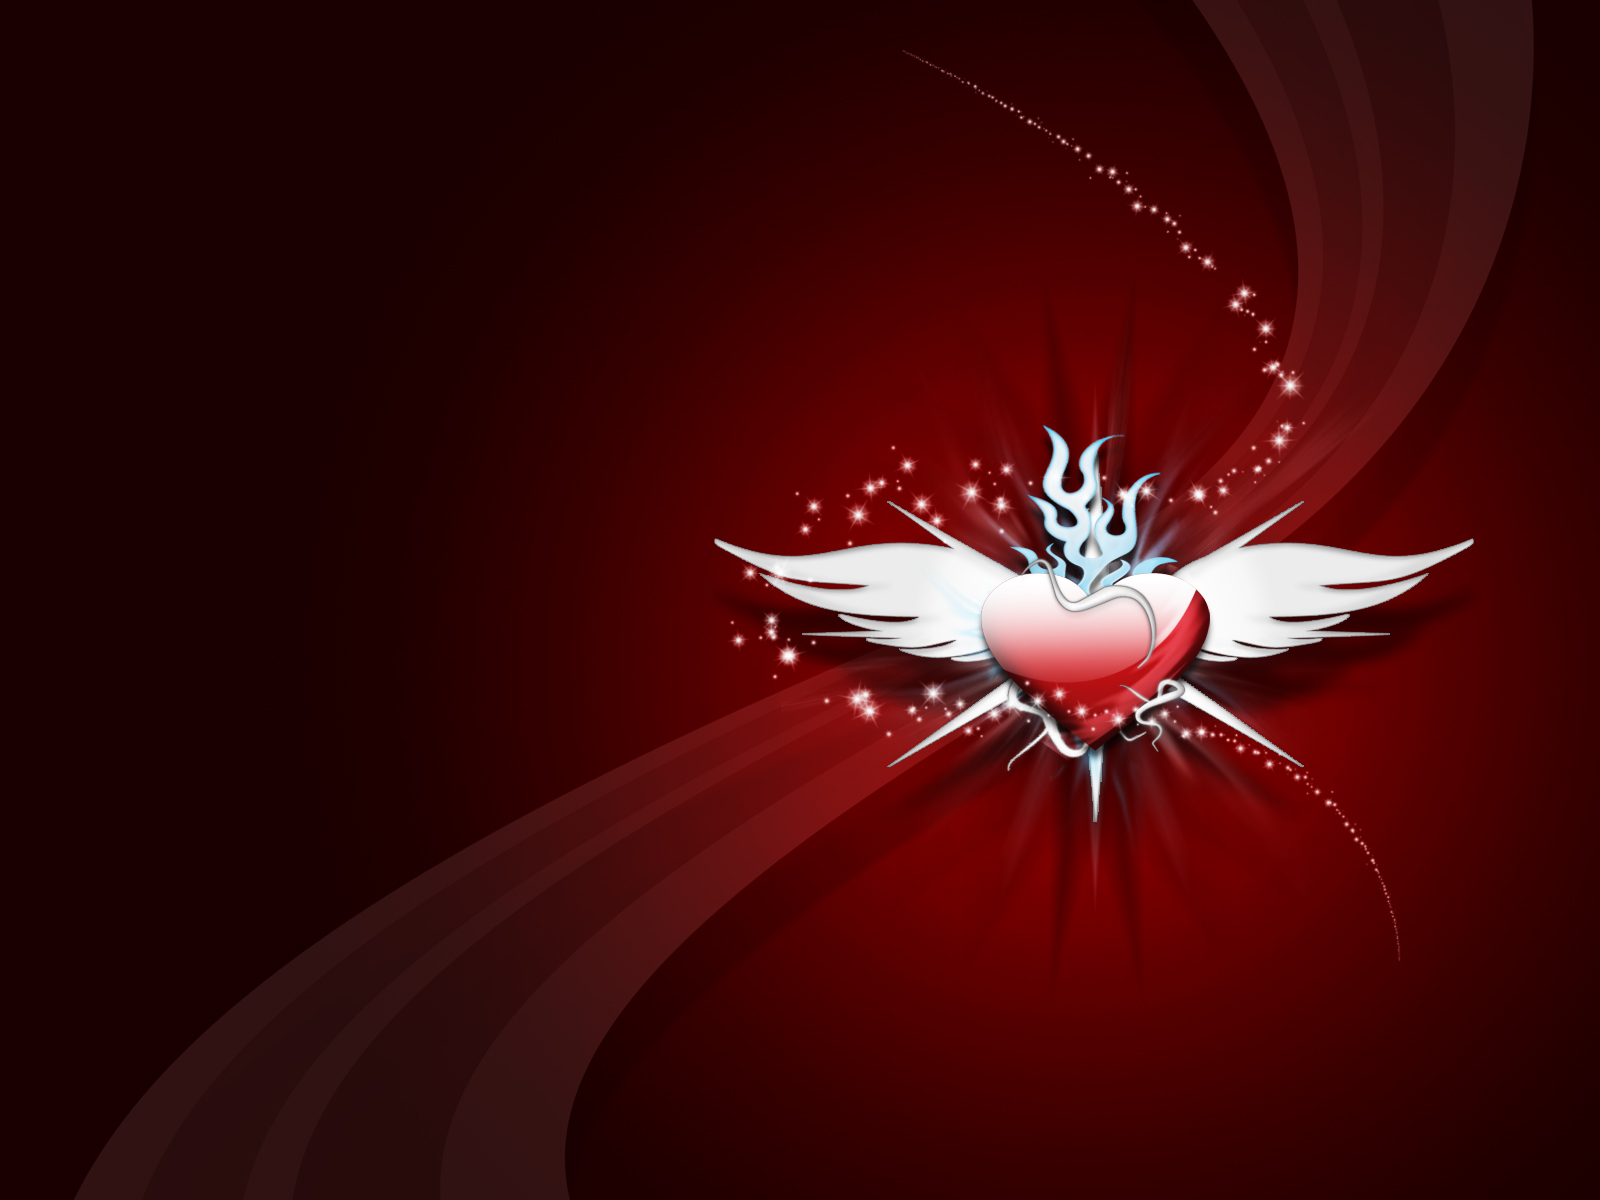 Heart With Wings Wallpaper Stock Photos